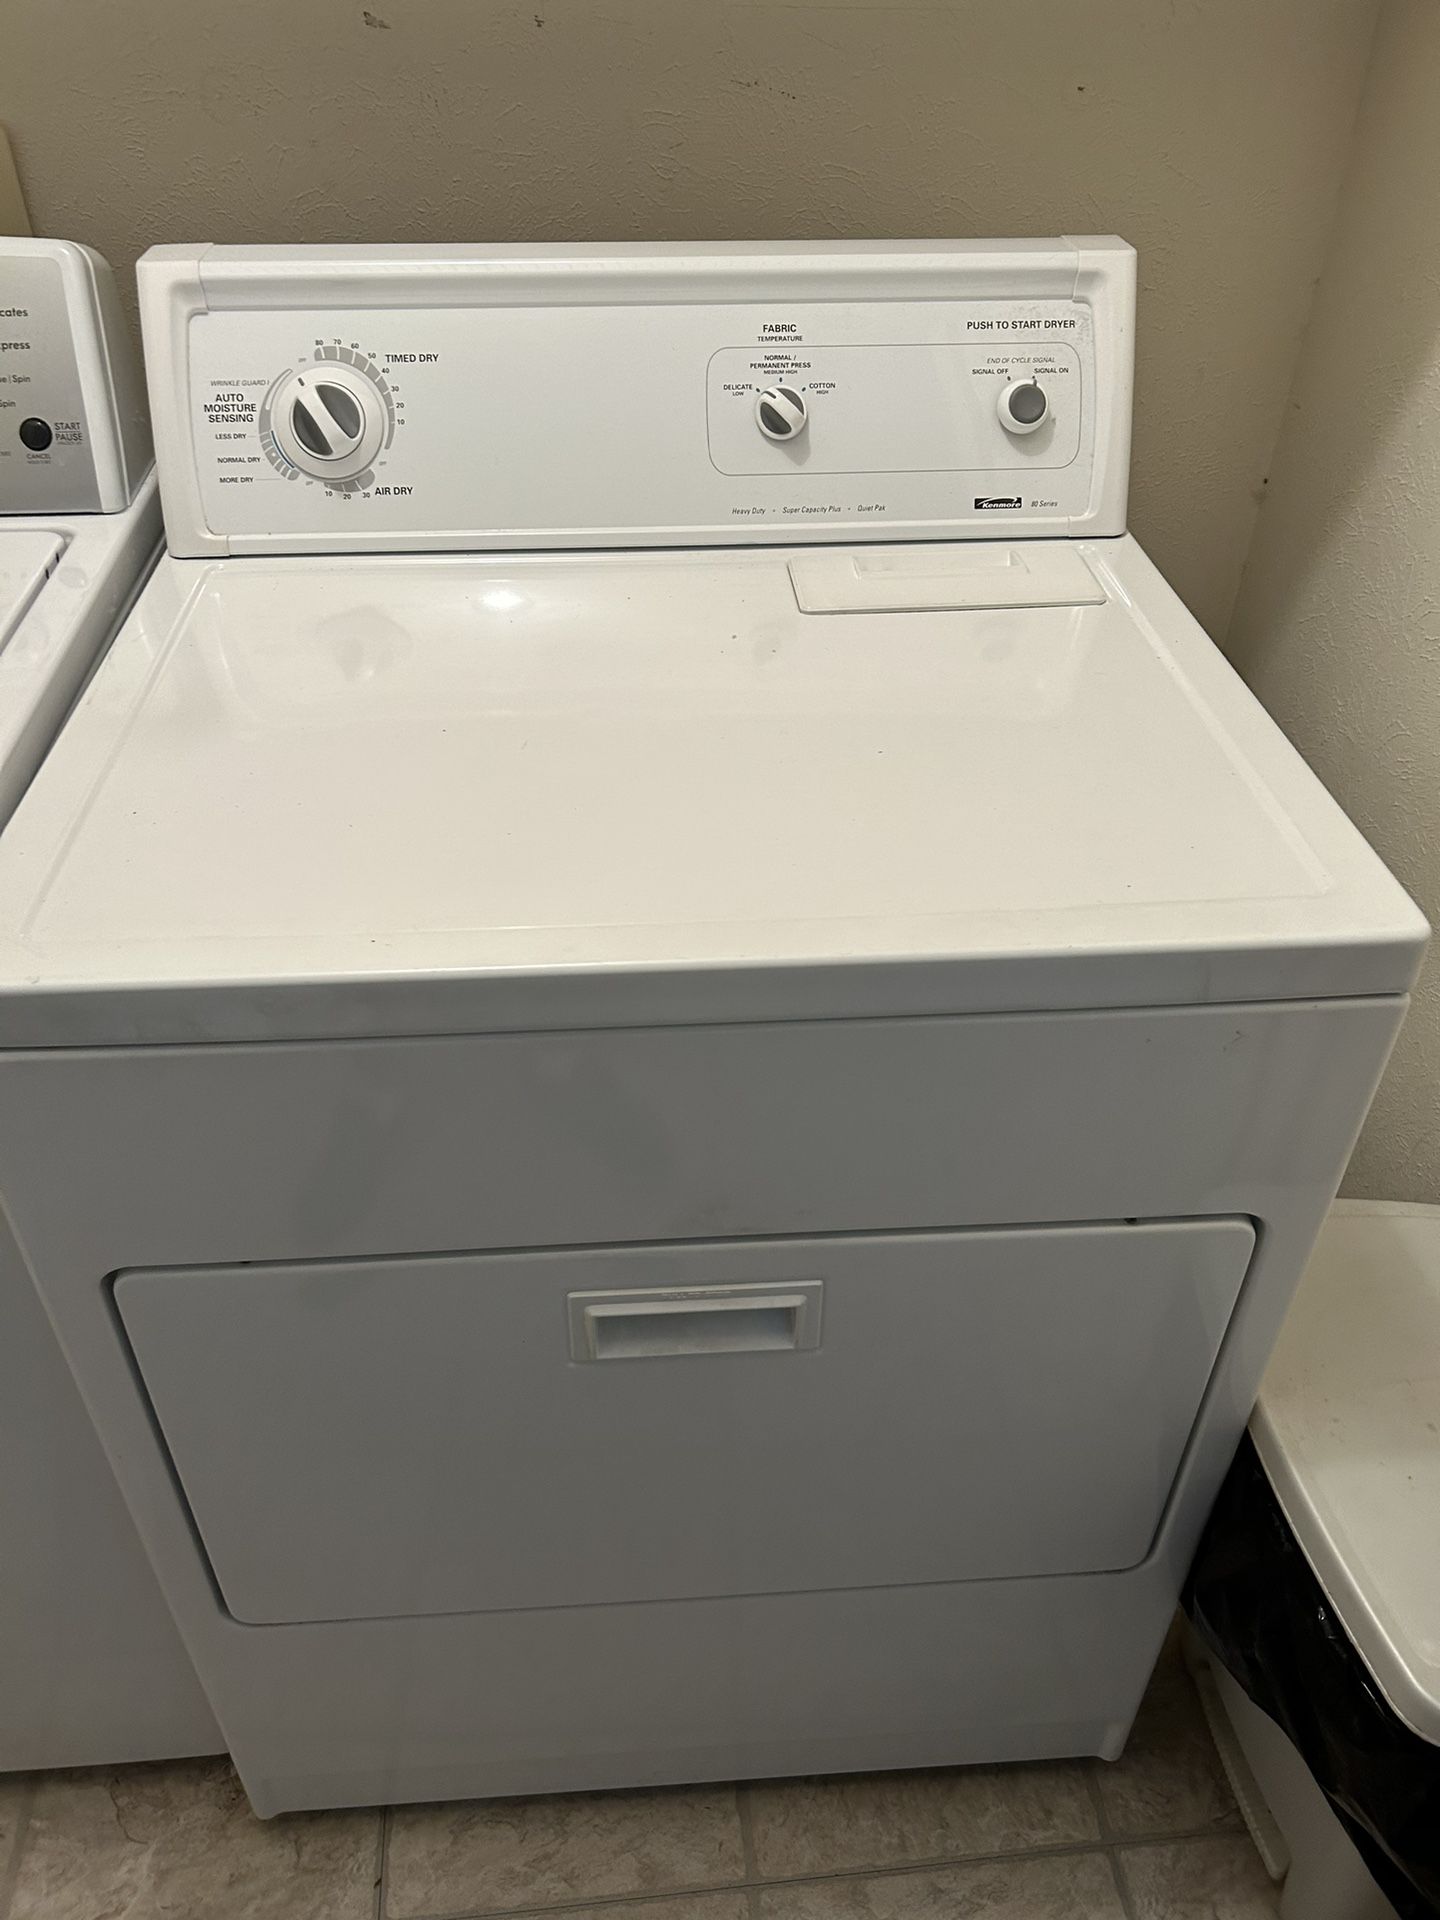 Kenmore Washer series 300 and Dryer 80 series